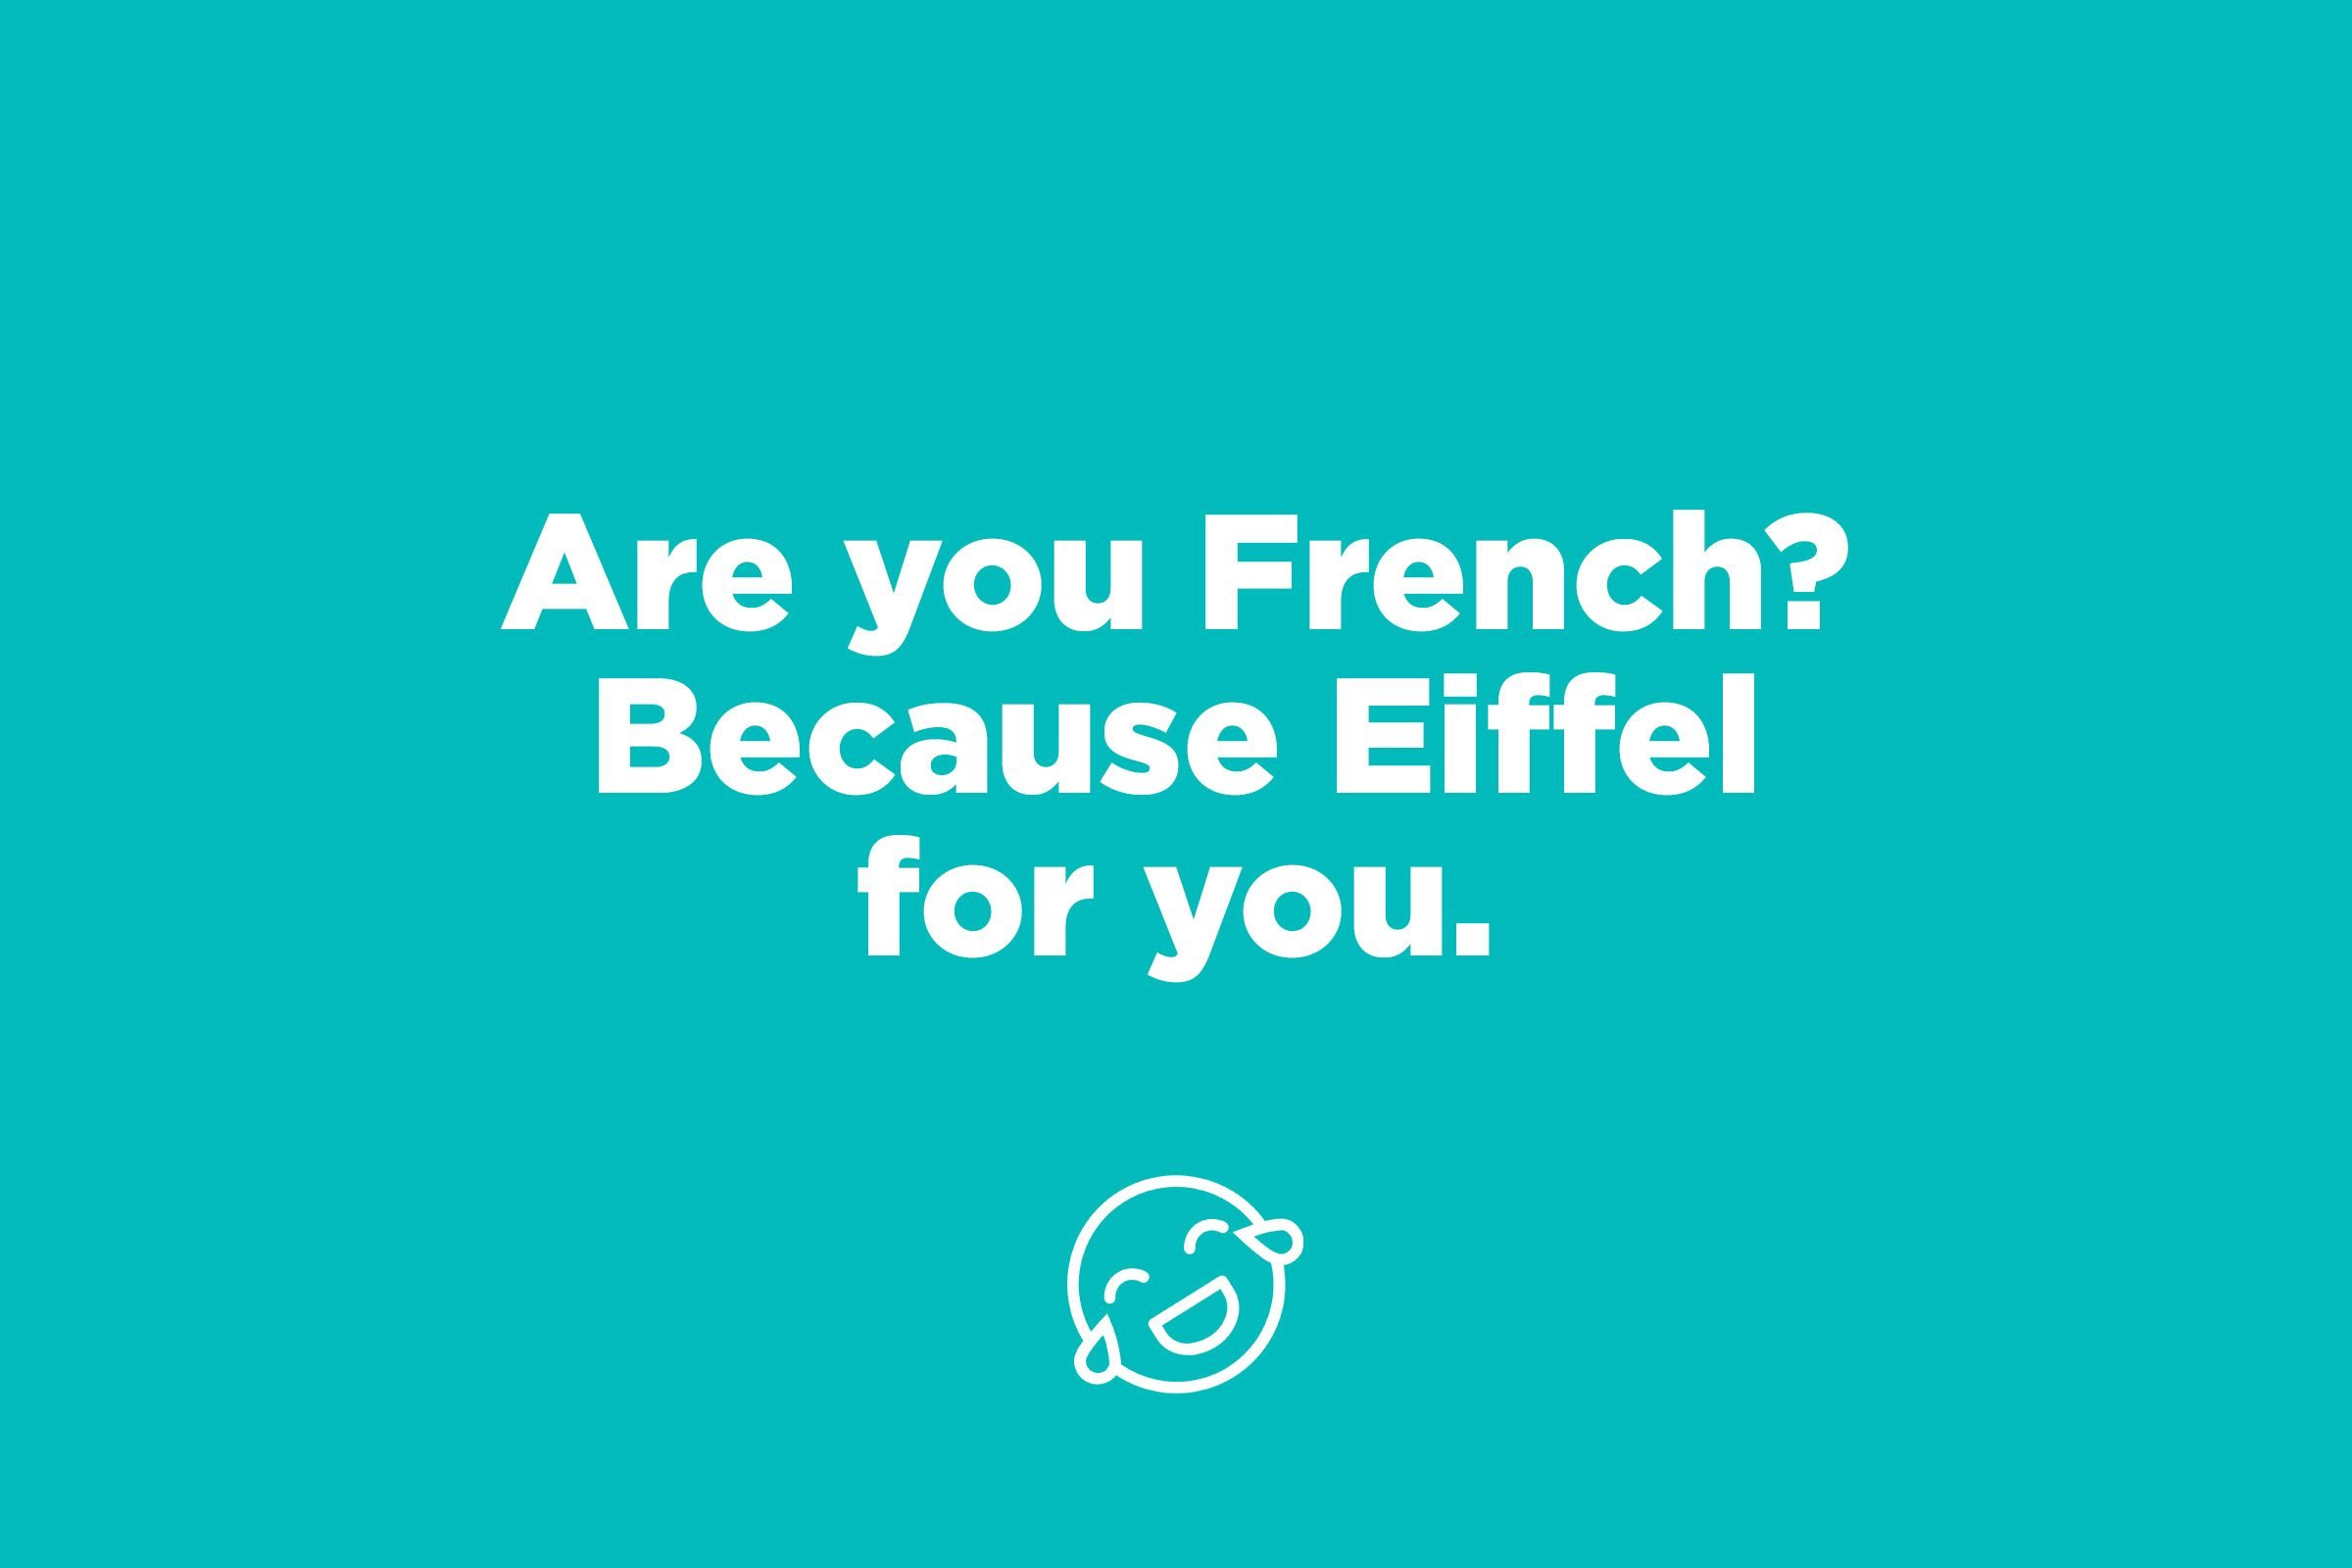 French pickup line